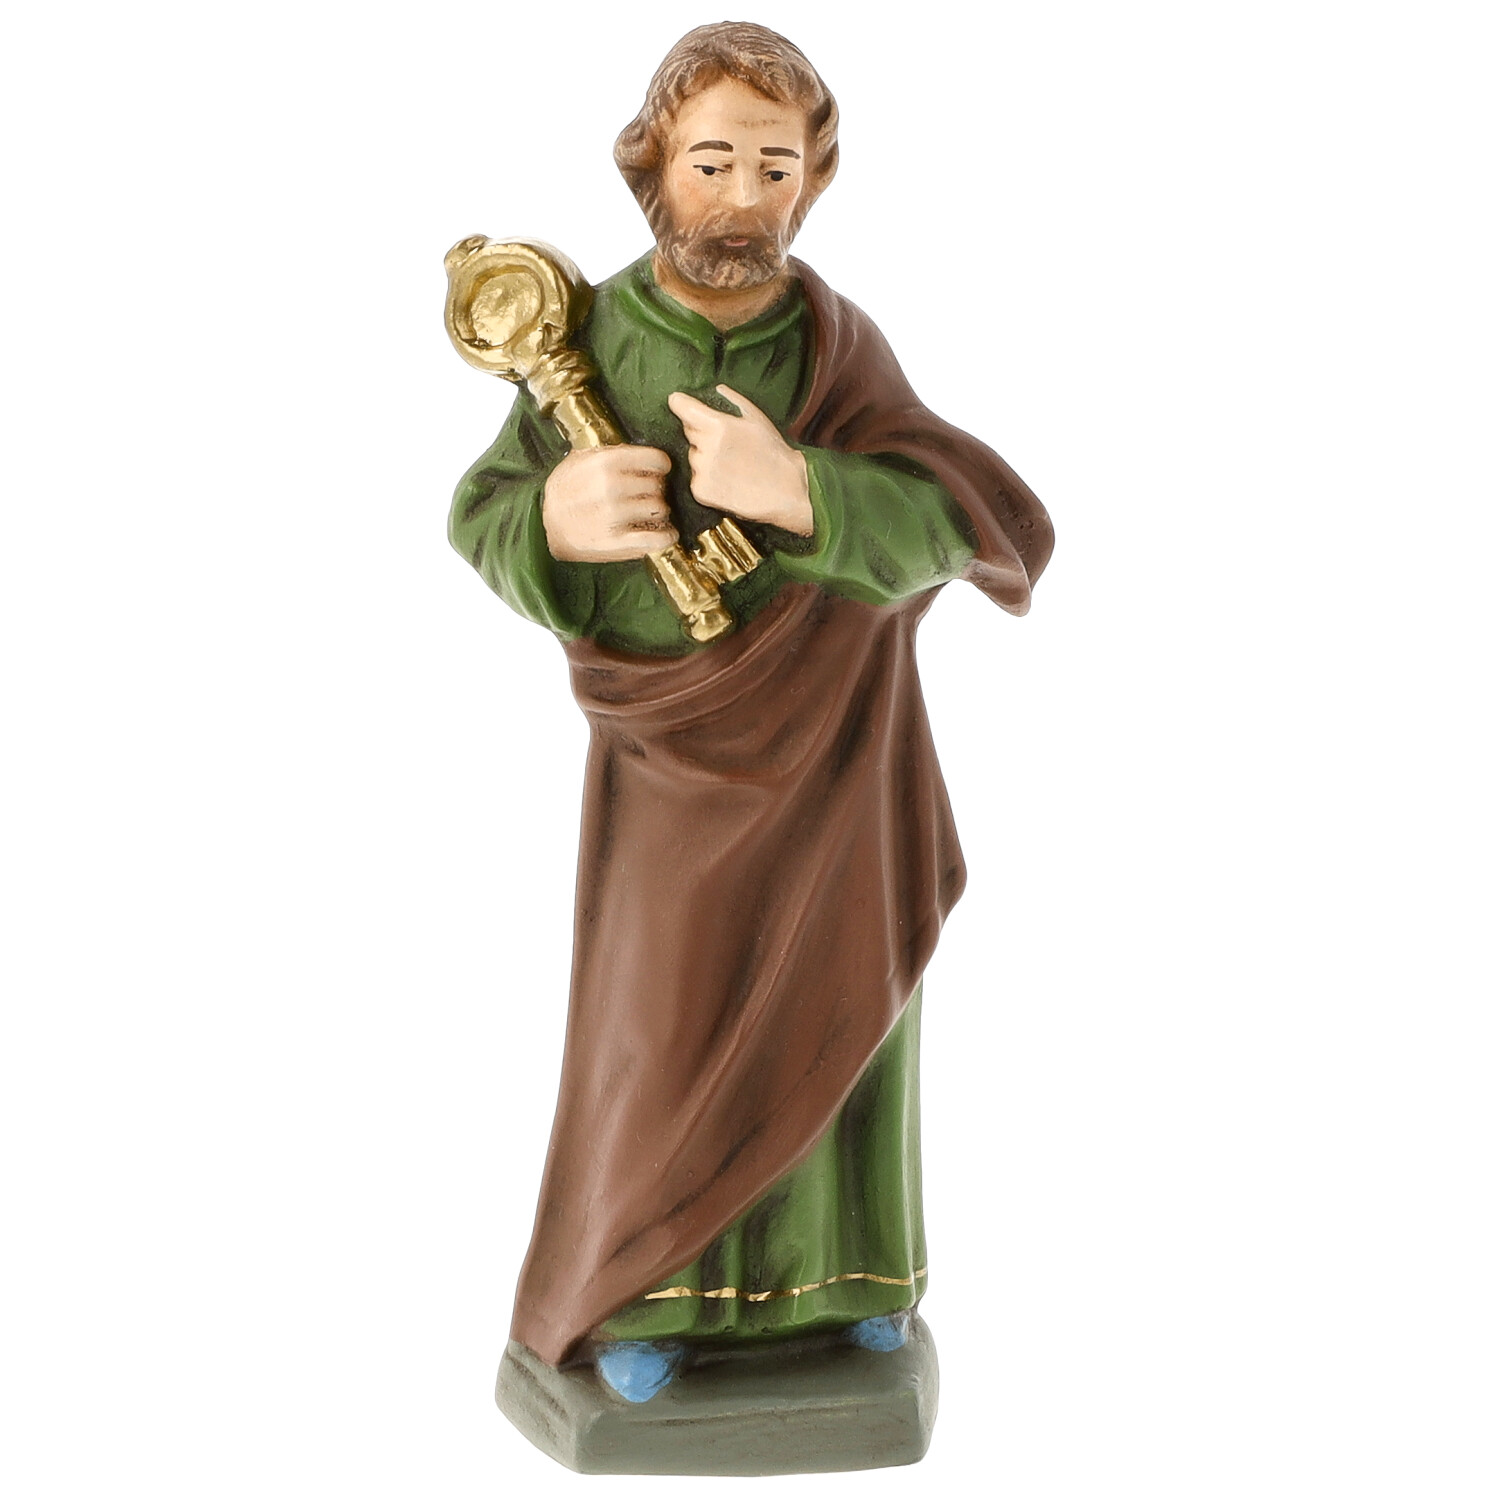 Apostle Peter, to 4.5 in. figures